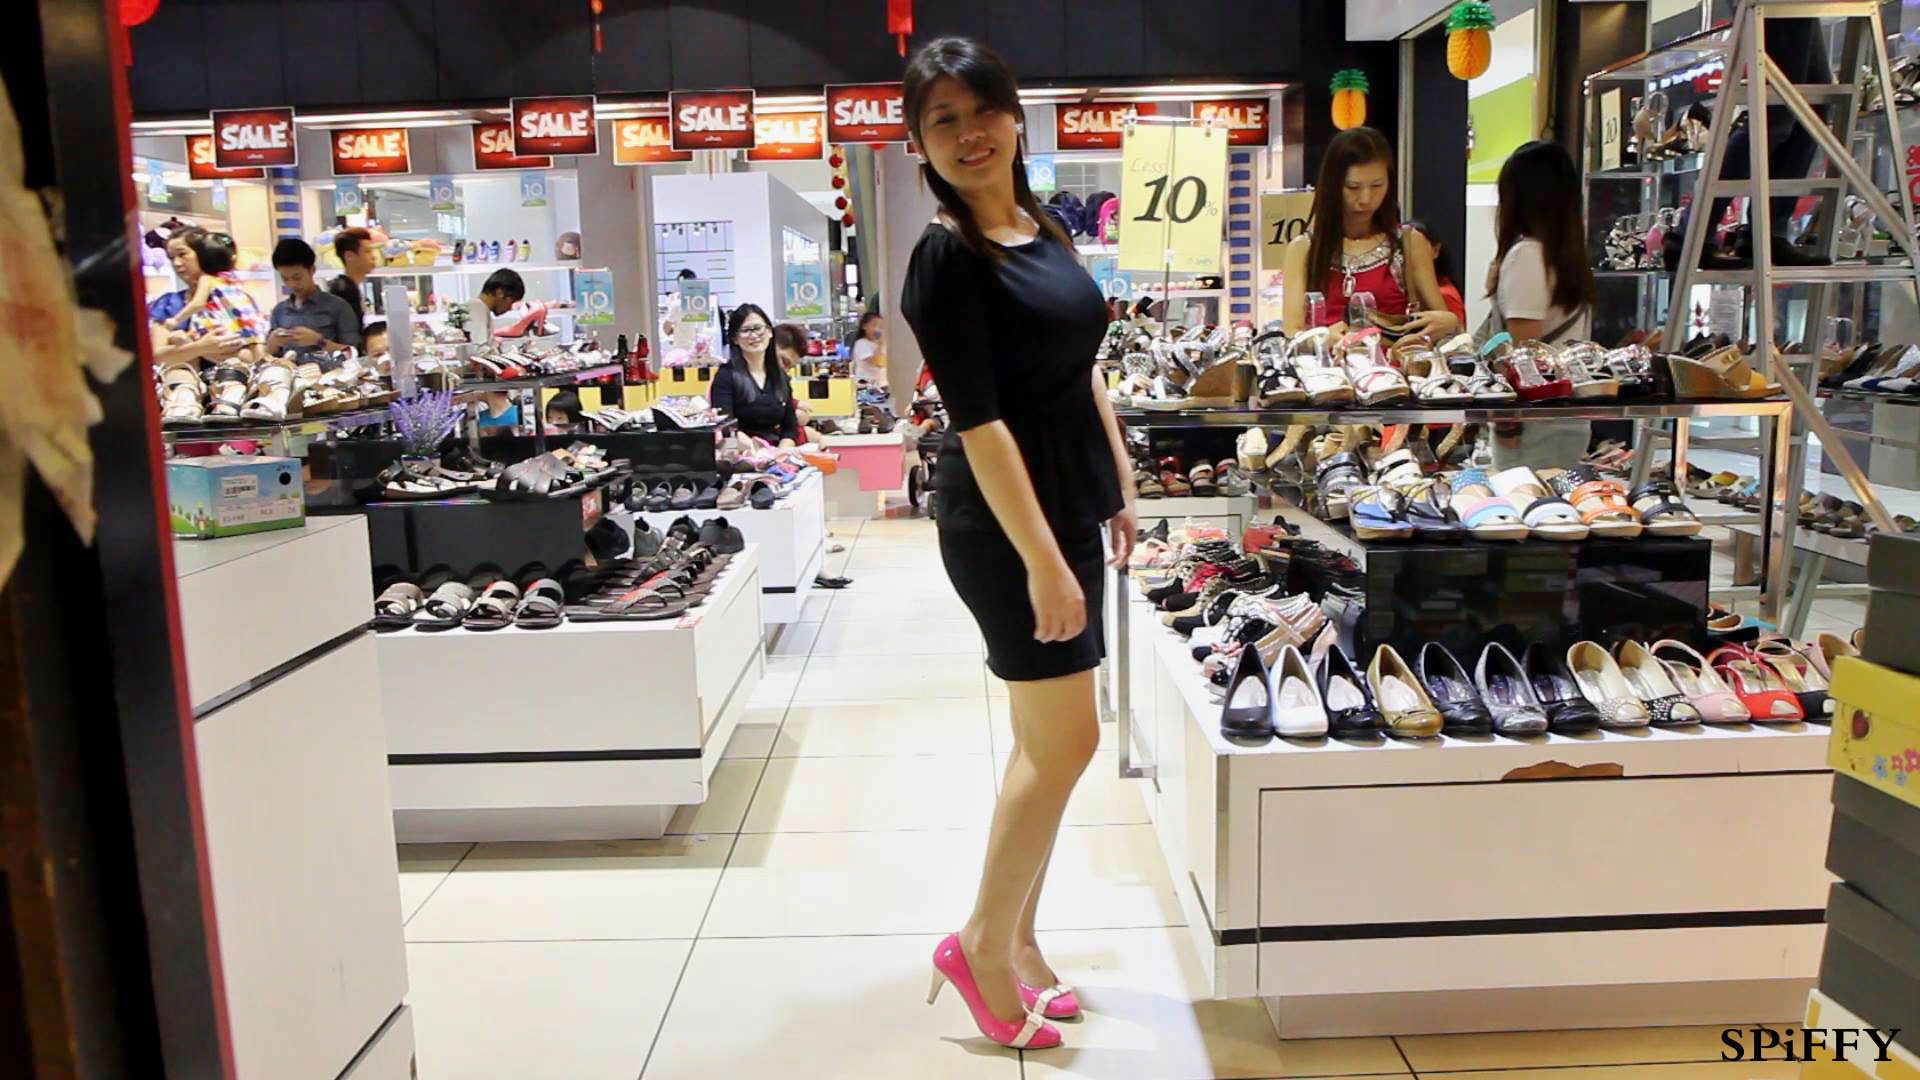 Spiffy Shoes Sales Malaysia for With You Club Members 家人 是一輩子的陪伴 - 陪伴 Accompany - 微電影 Spiffy Shoes Present Spiffy Shoes Jan 2015 A06